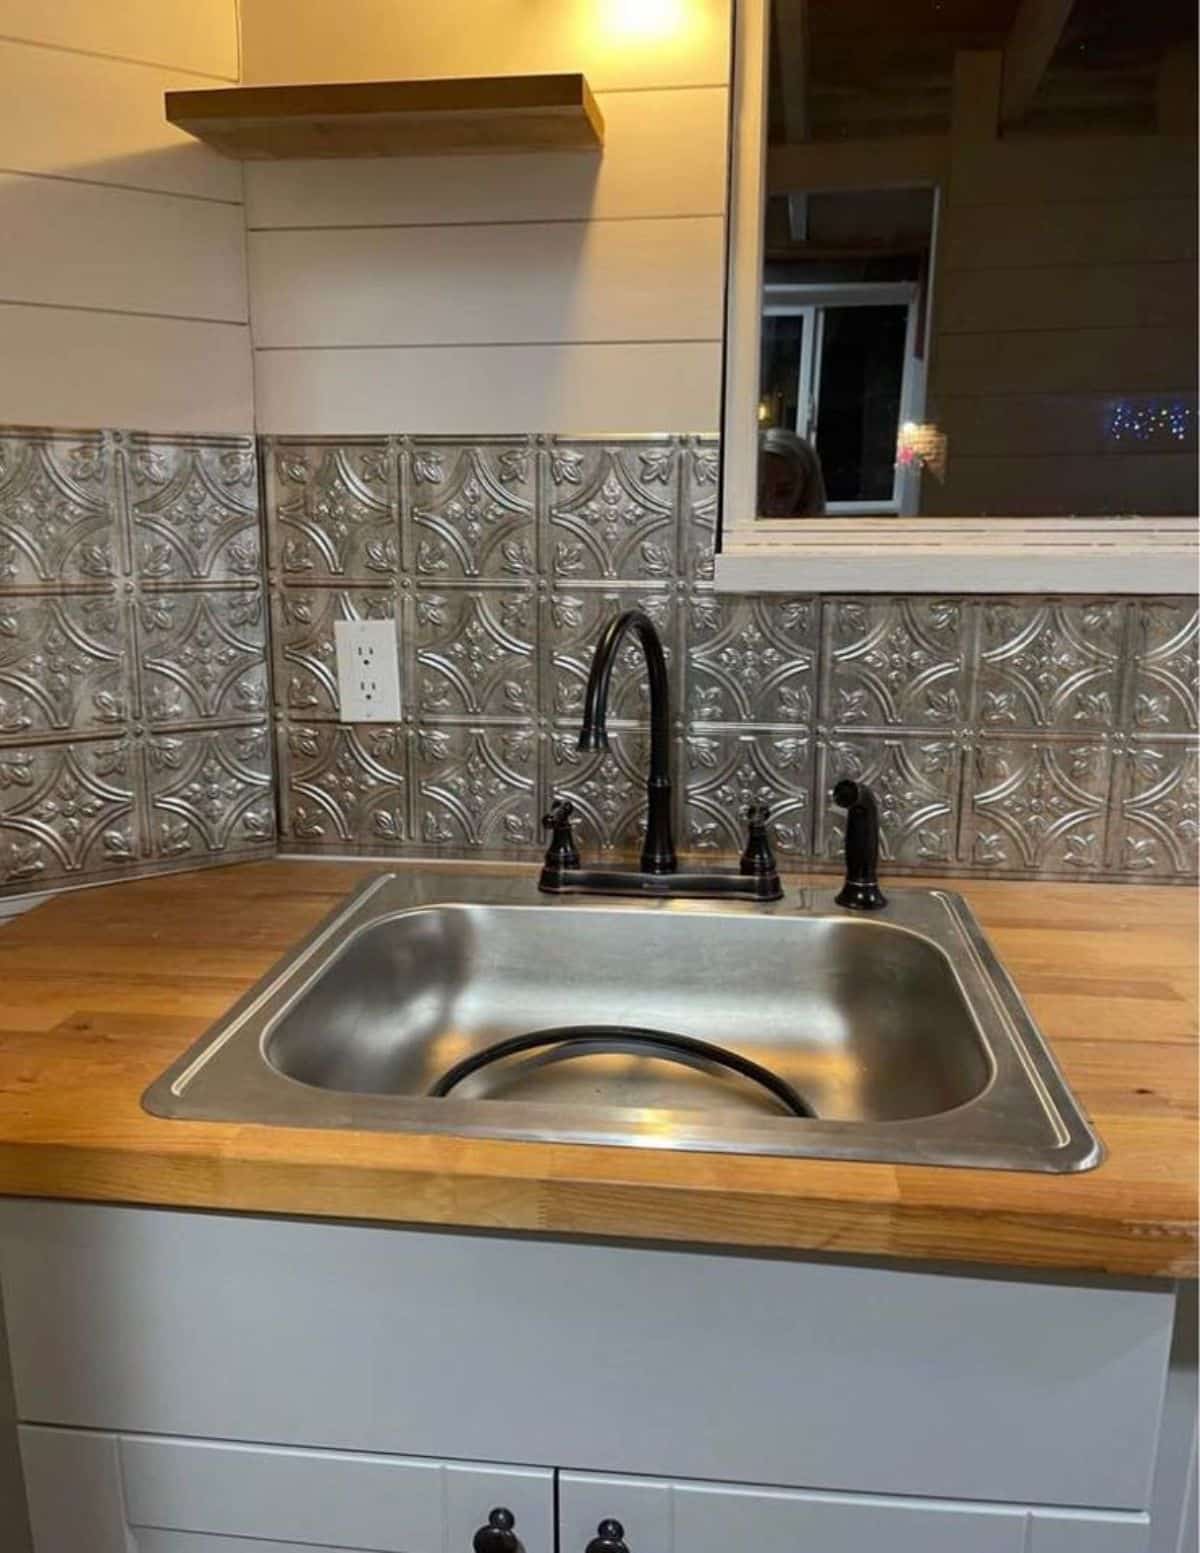 stainless steel sink in the kitchen area of the house